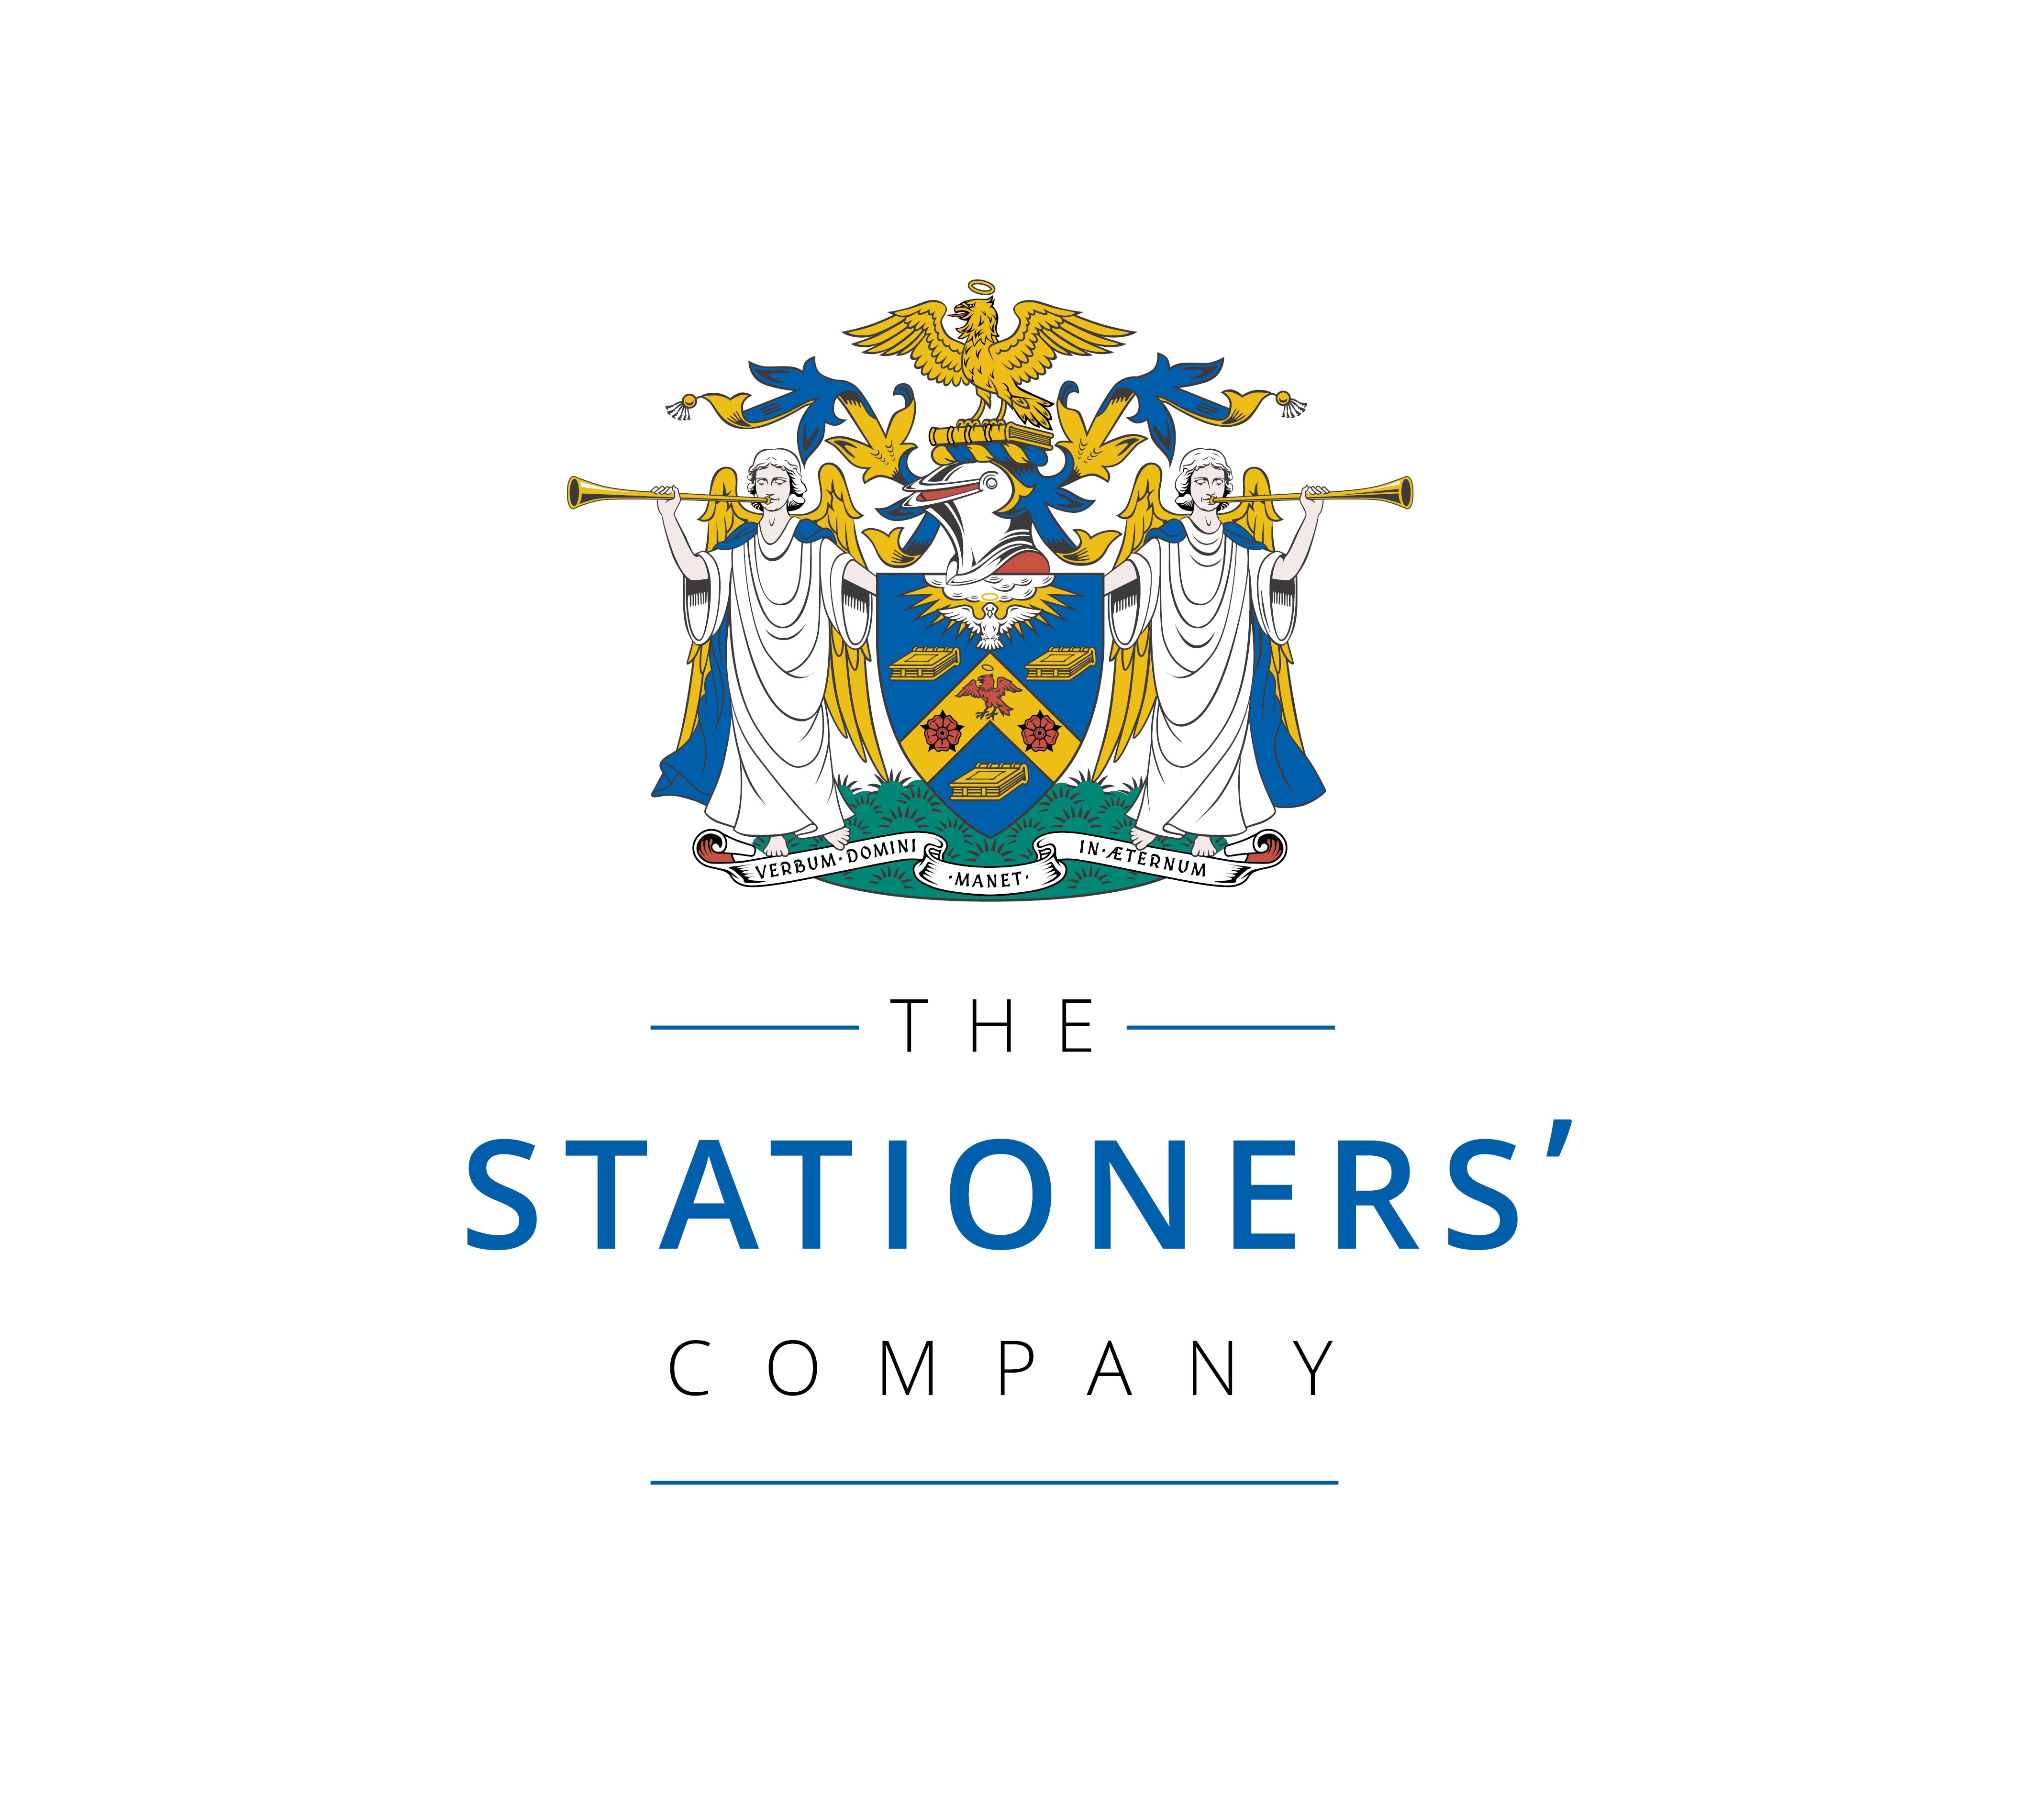 New award category announced for the 2020 Stationers’ Company Innovation Excellence Awards